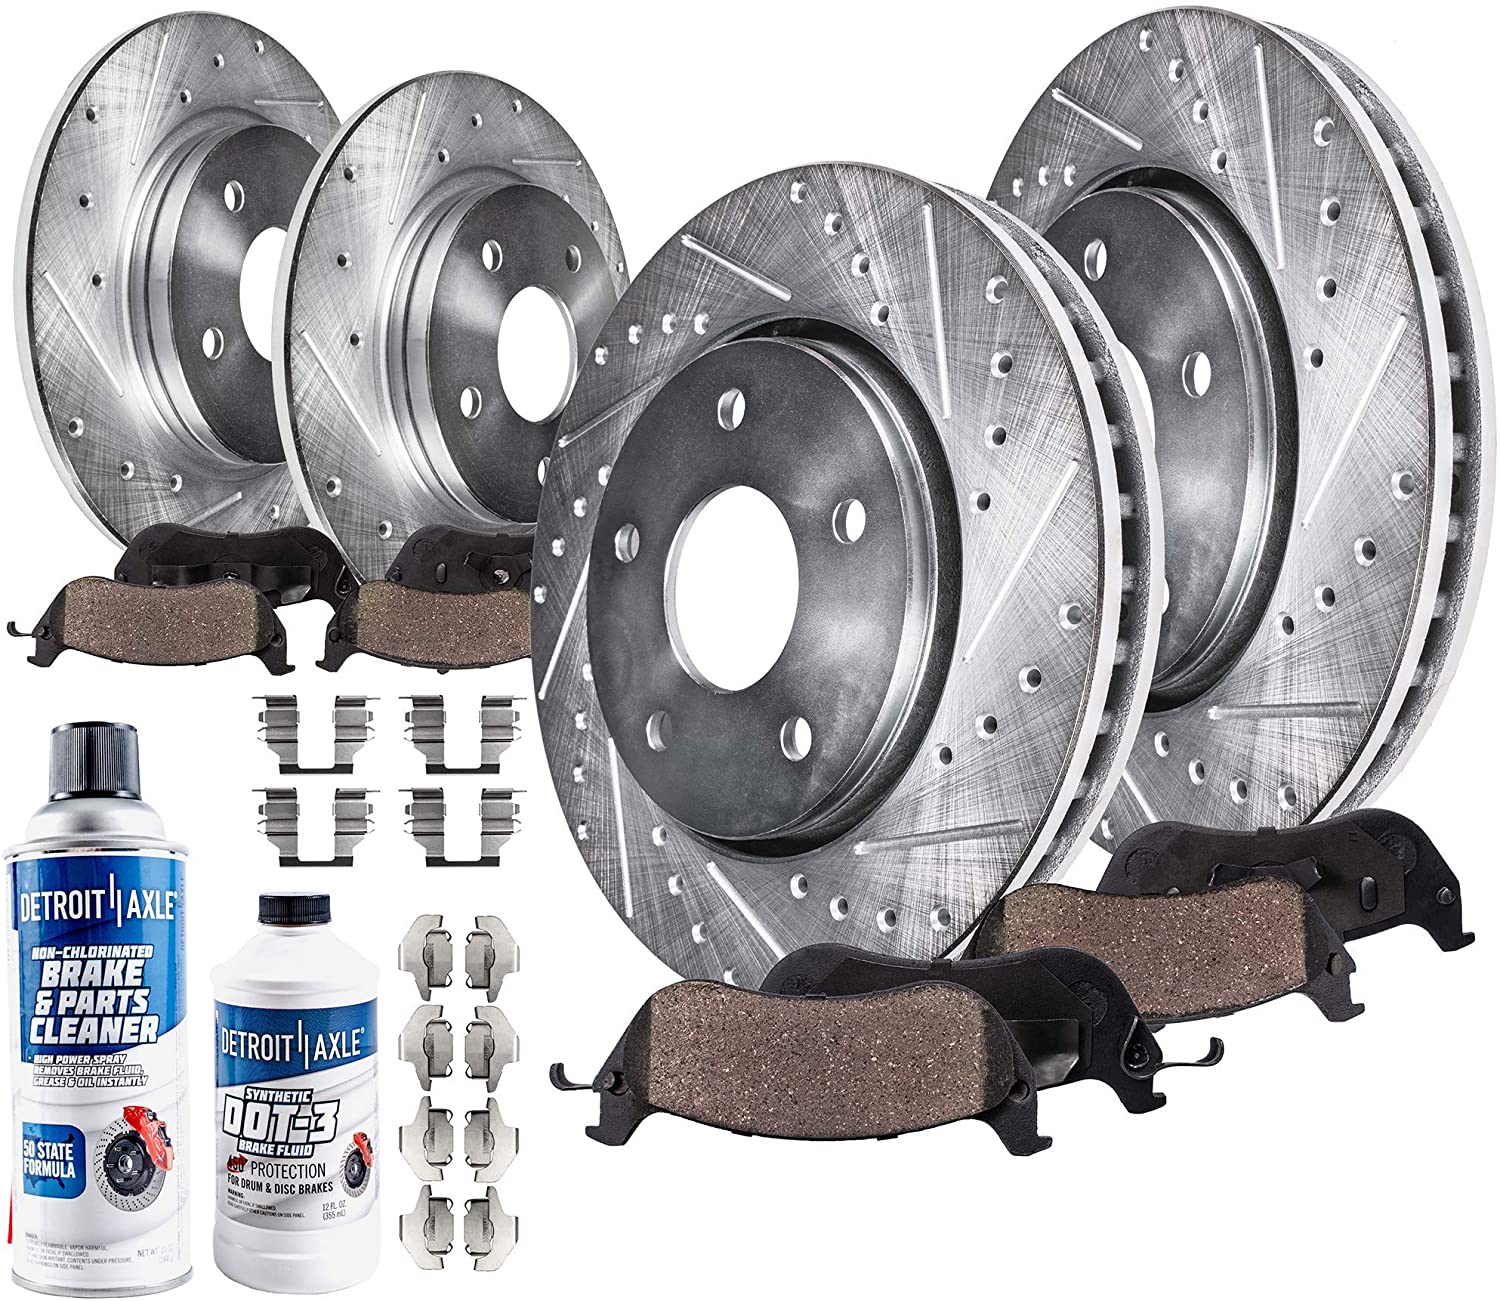 Detroit Axle - All (4) Front and Rear Drilled and Slotted Disc Brake Kit Rotors w/Ceramic Pad Kit for 2006-07 Toyota Highlander Hybrid - [2004-06 Lexus RX330] - 2006-08 RX400h - [2007-09 RX350]